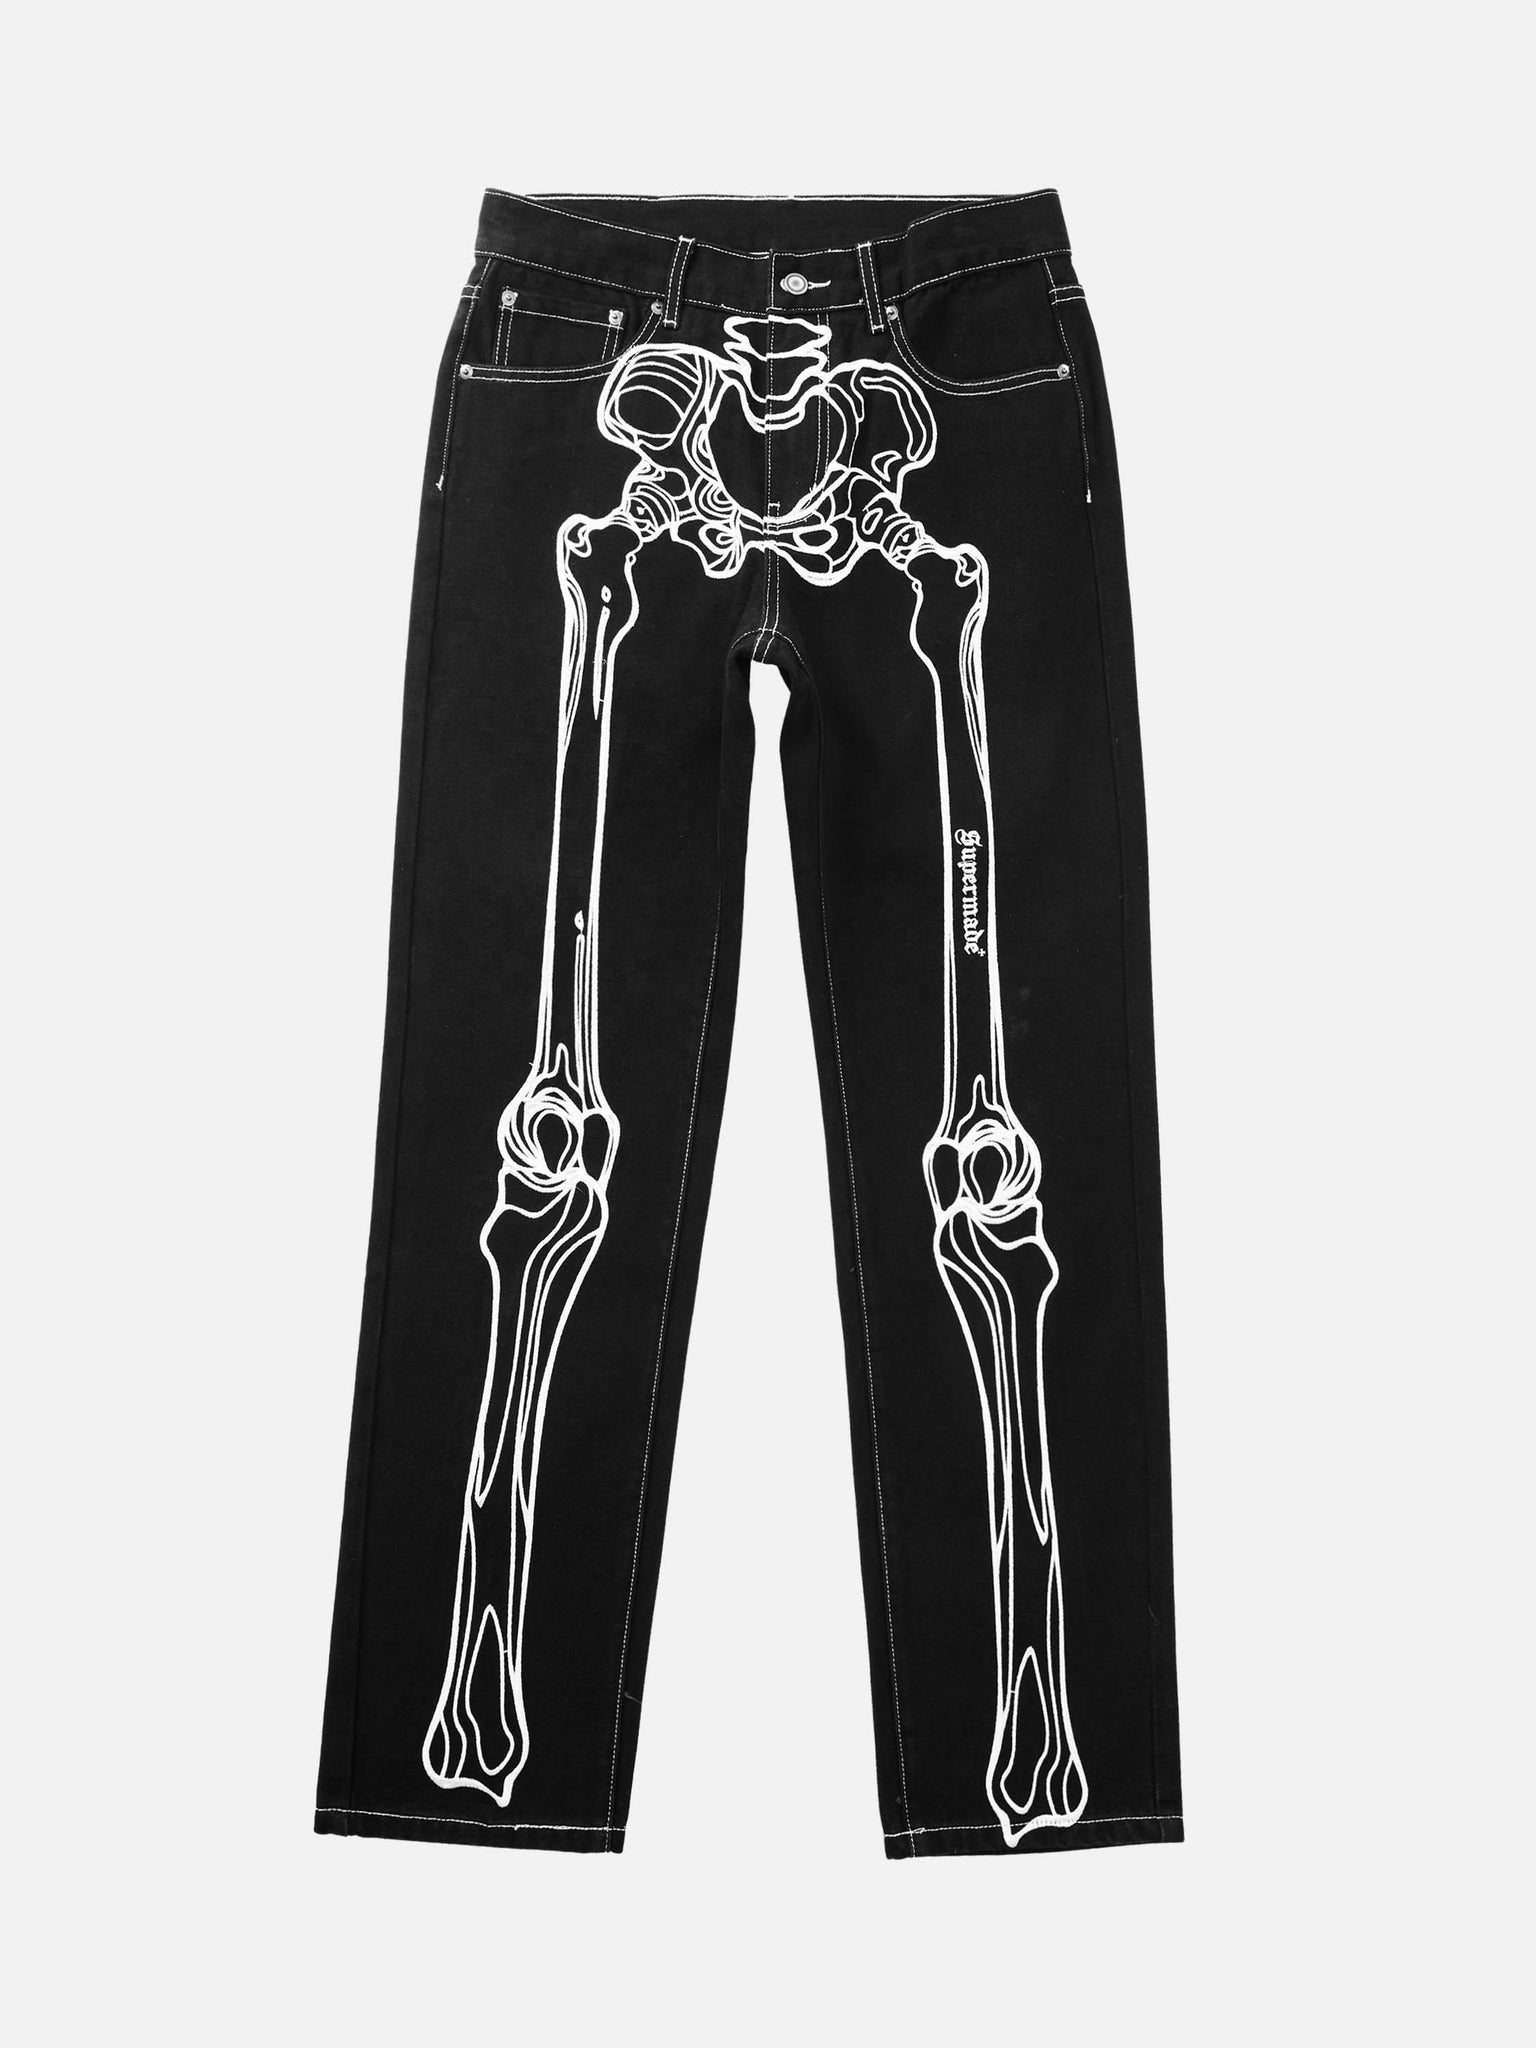 Thesupermade Hip Hop Bones Embroidered Jeans - 1859